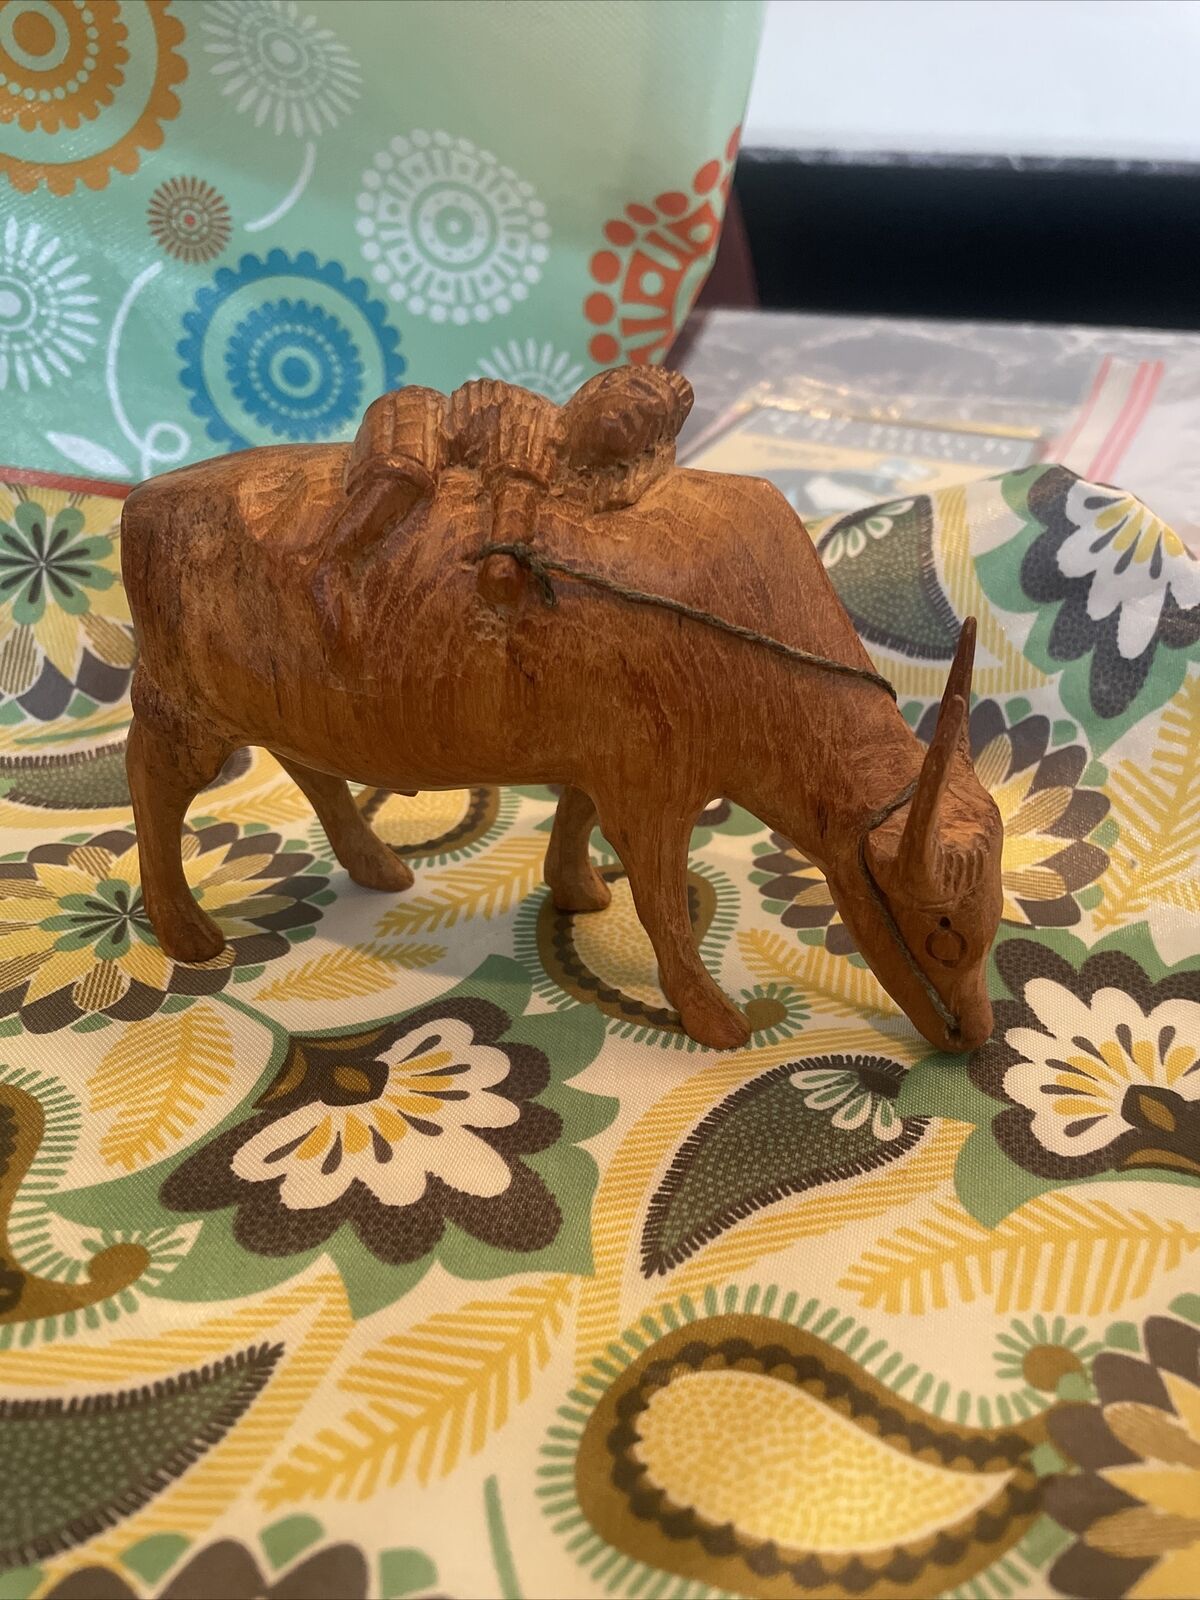 Hand Carved Bull With Sleep Boy- Carved From A Single Piece Of Wood